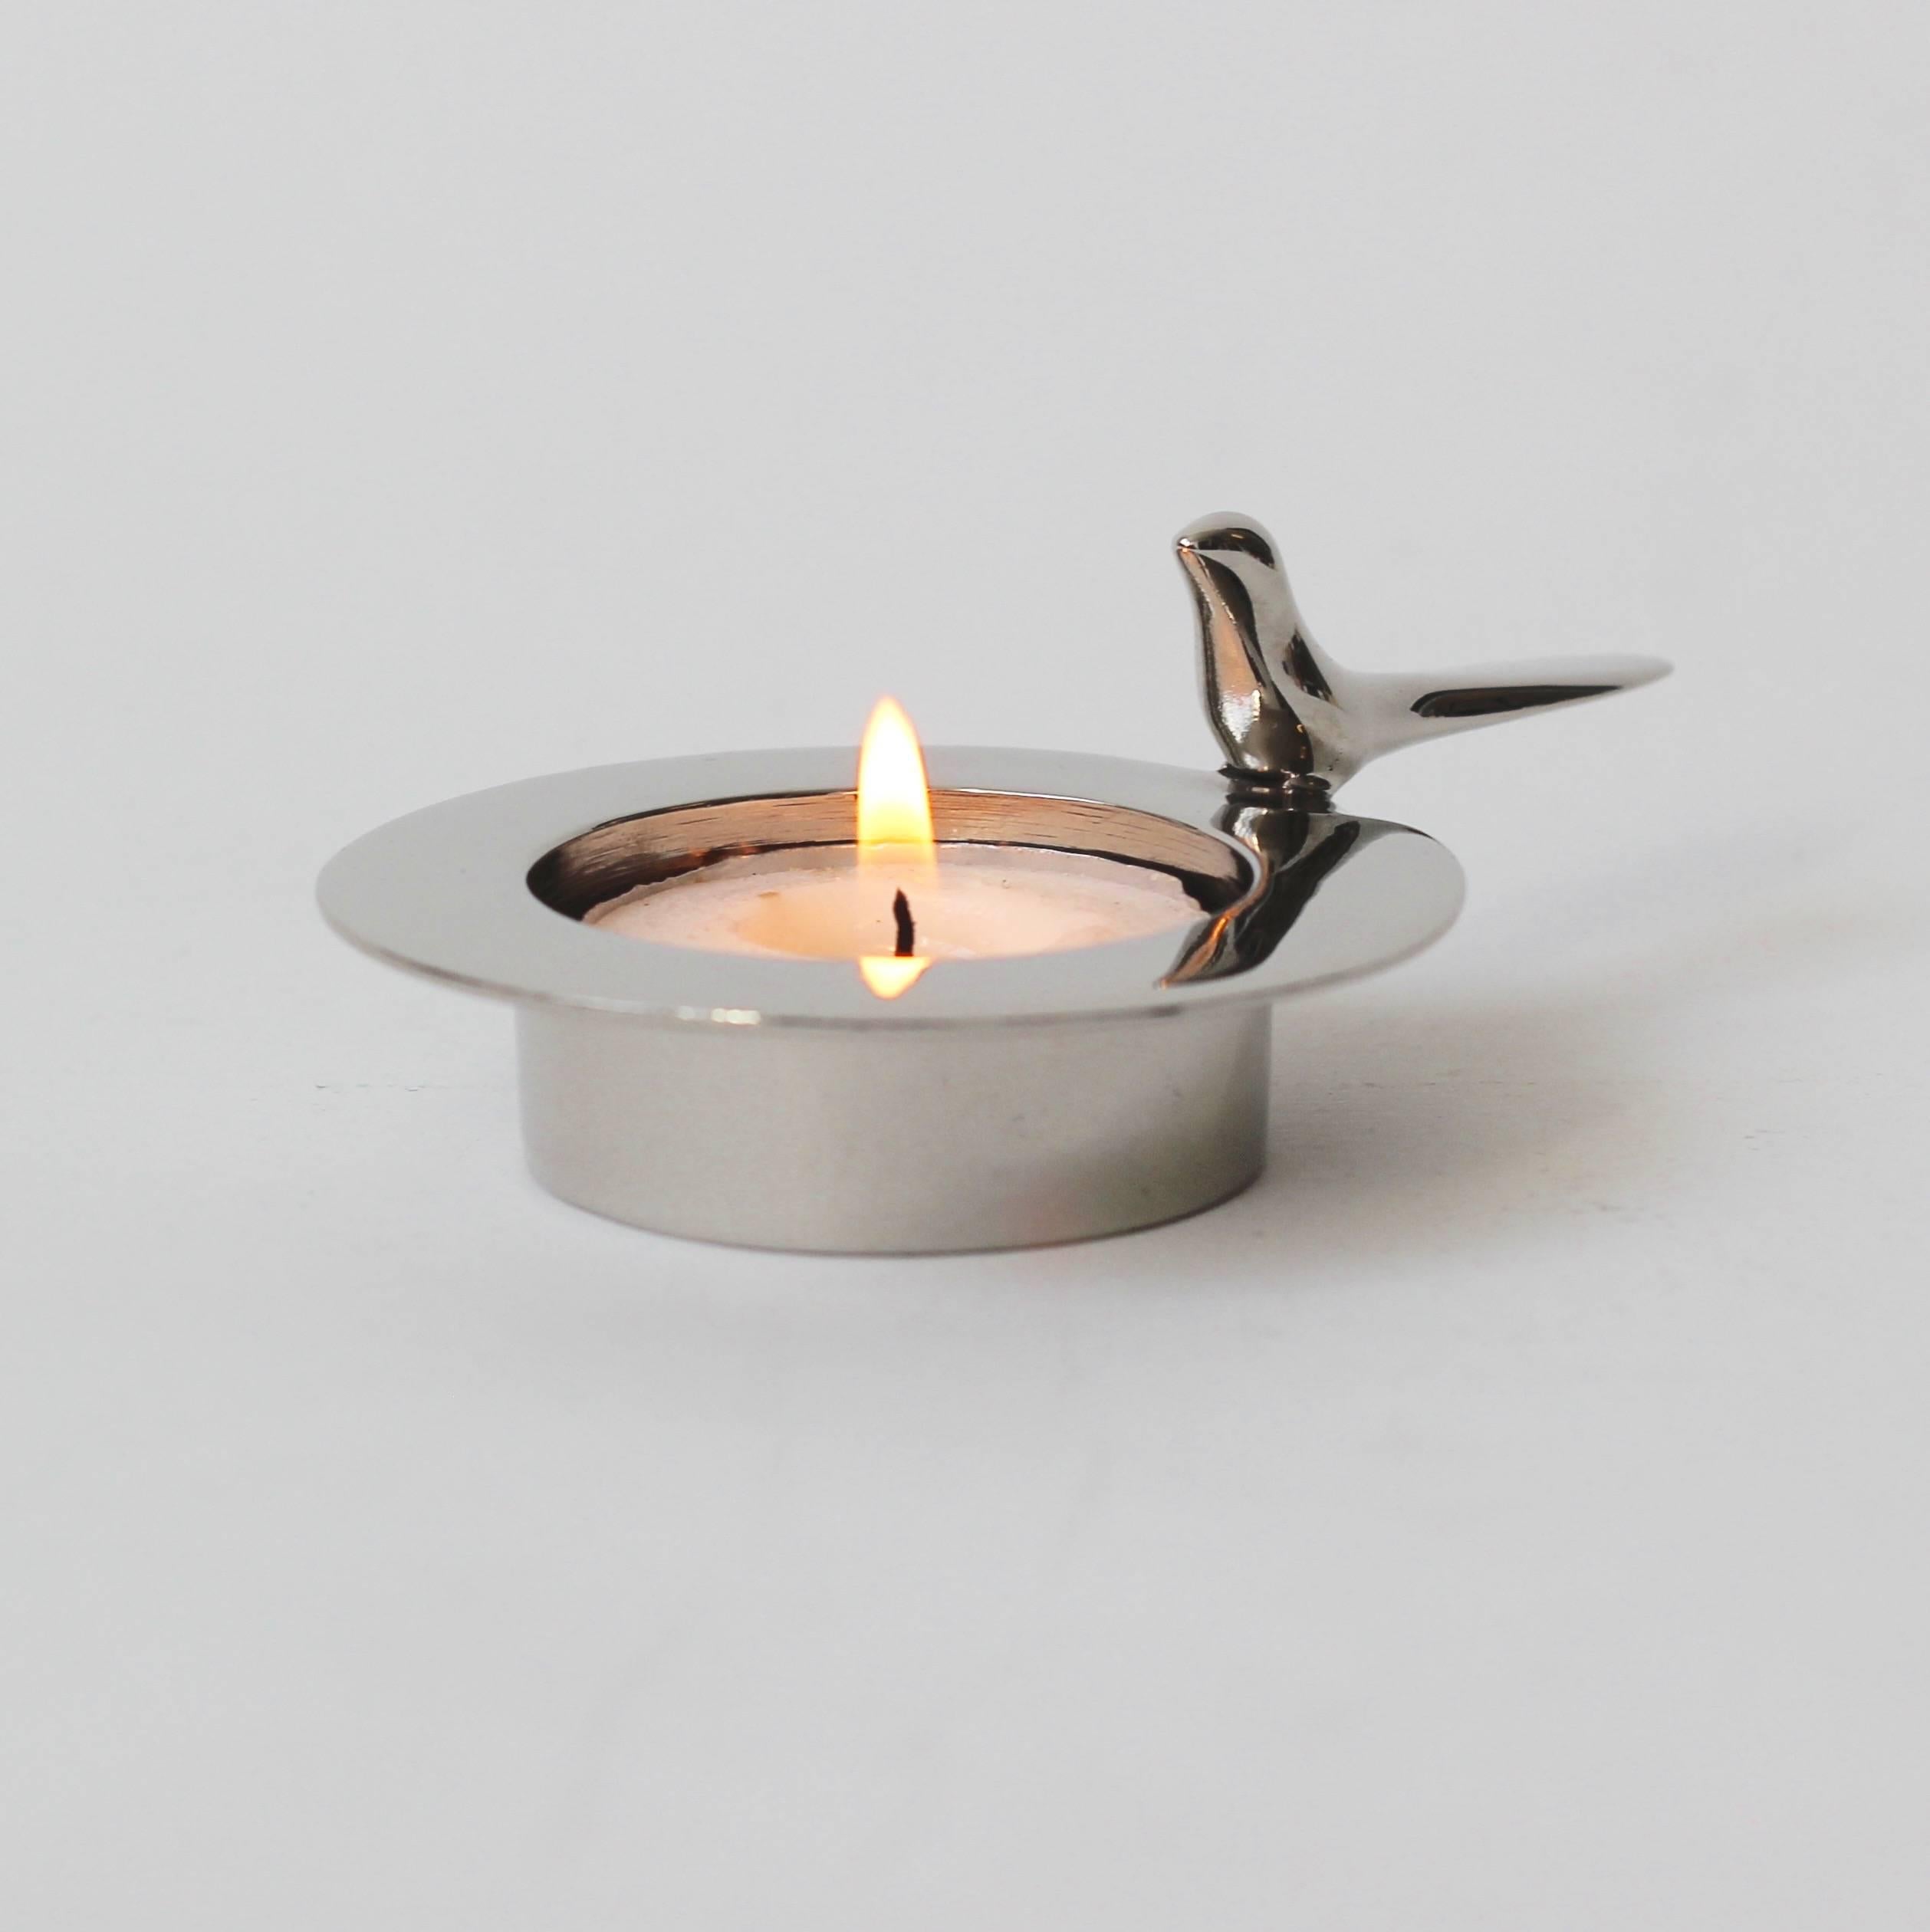 Each of those original and elegant brass tea light holders is handmade individually. Cast using very traditional techniques, they are finished with a nickel plating giving them a bright silvery feel.